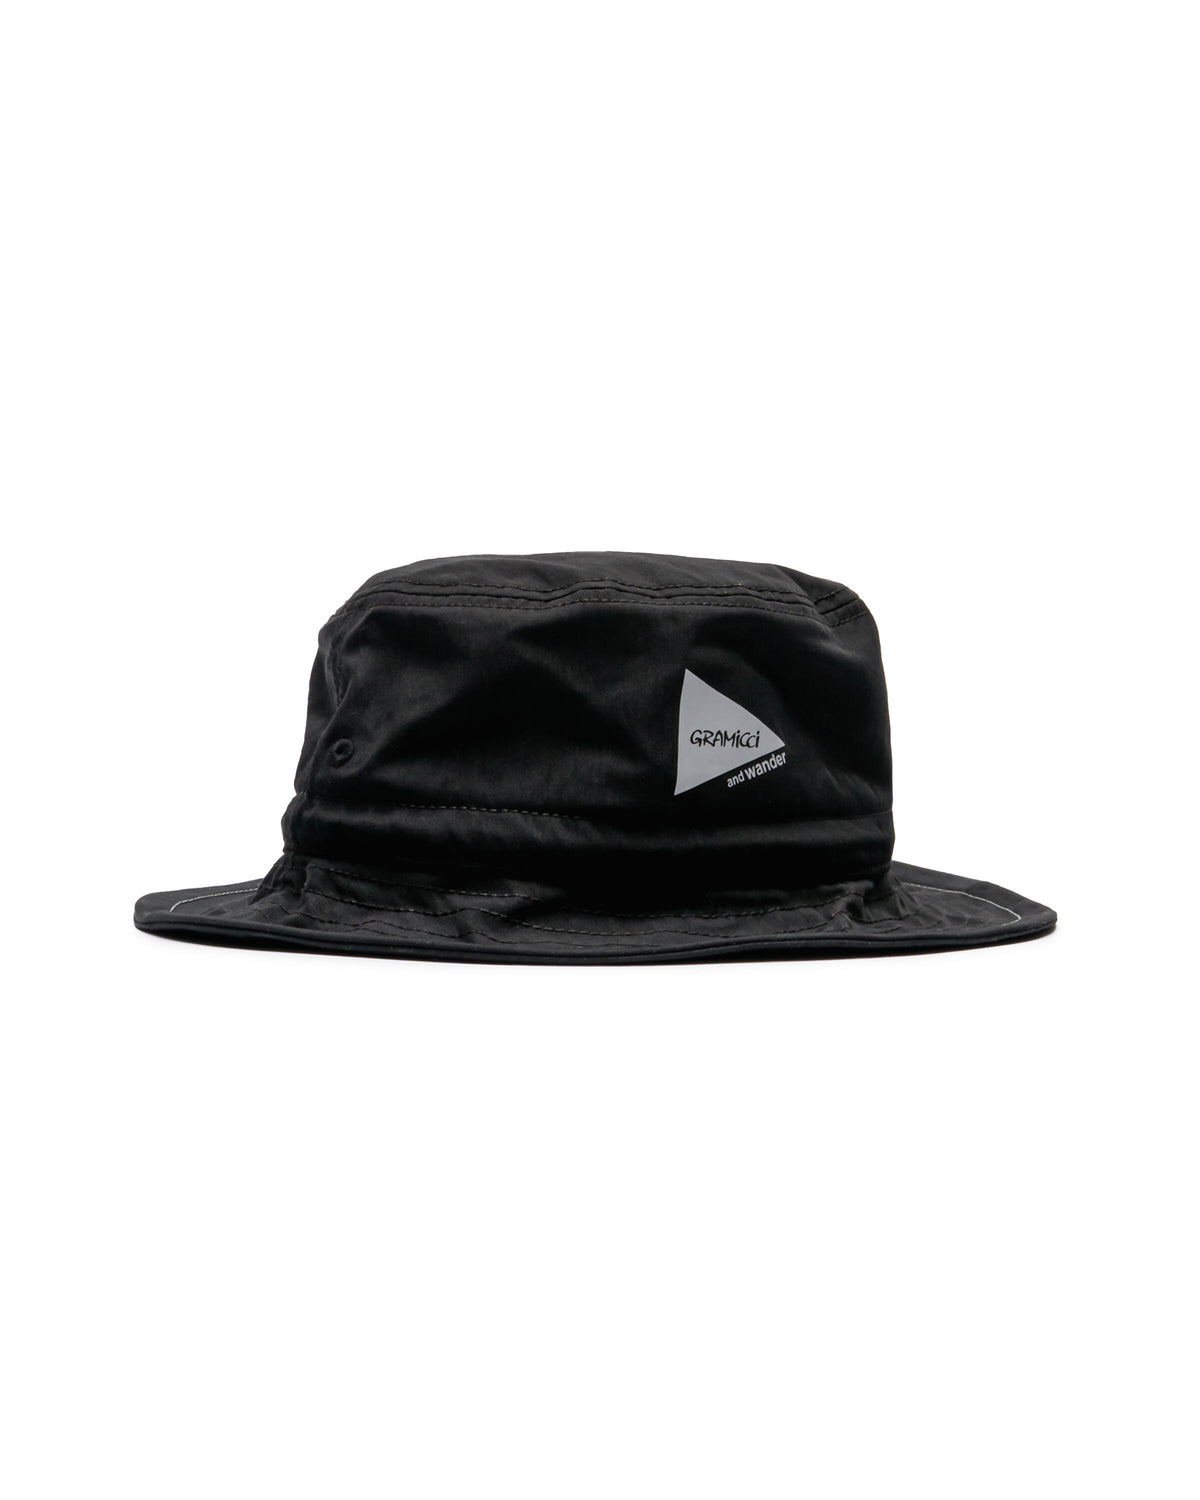 Gramicci x And Wander NYCO HAT